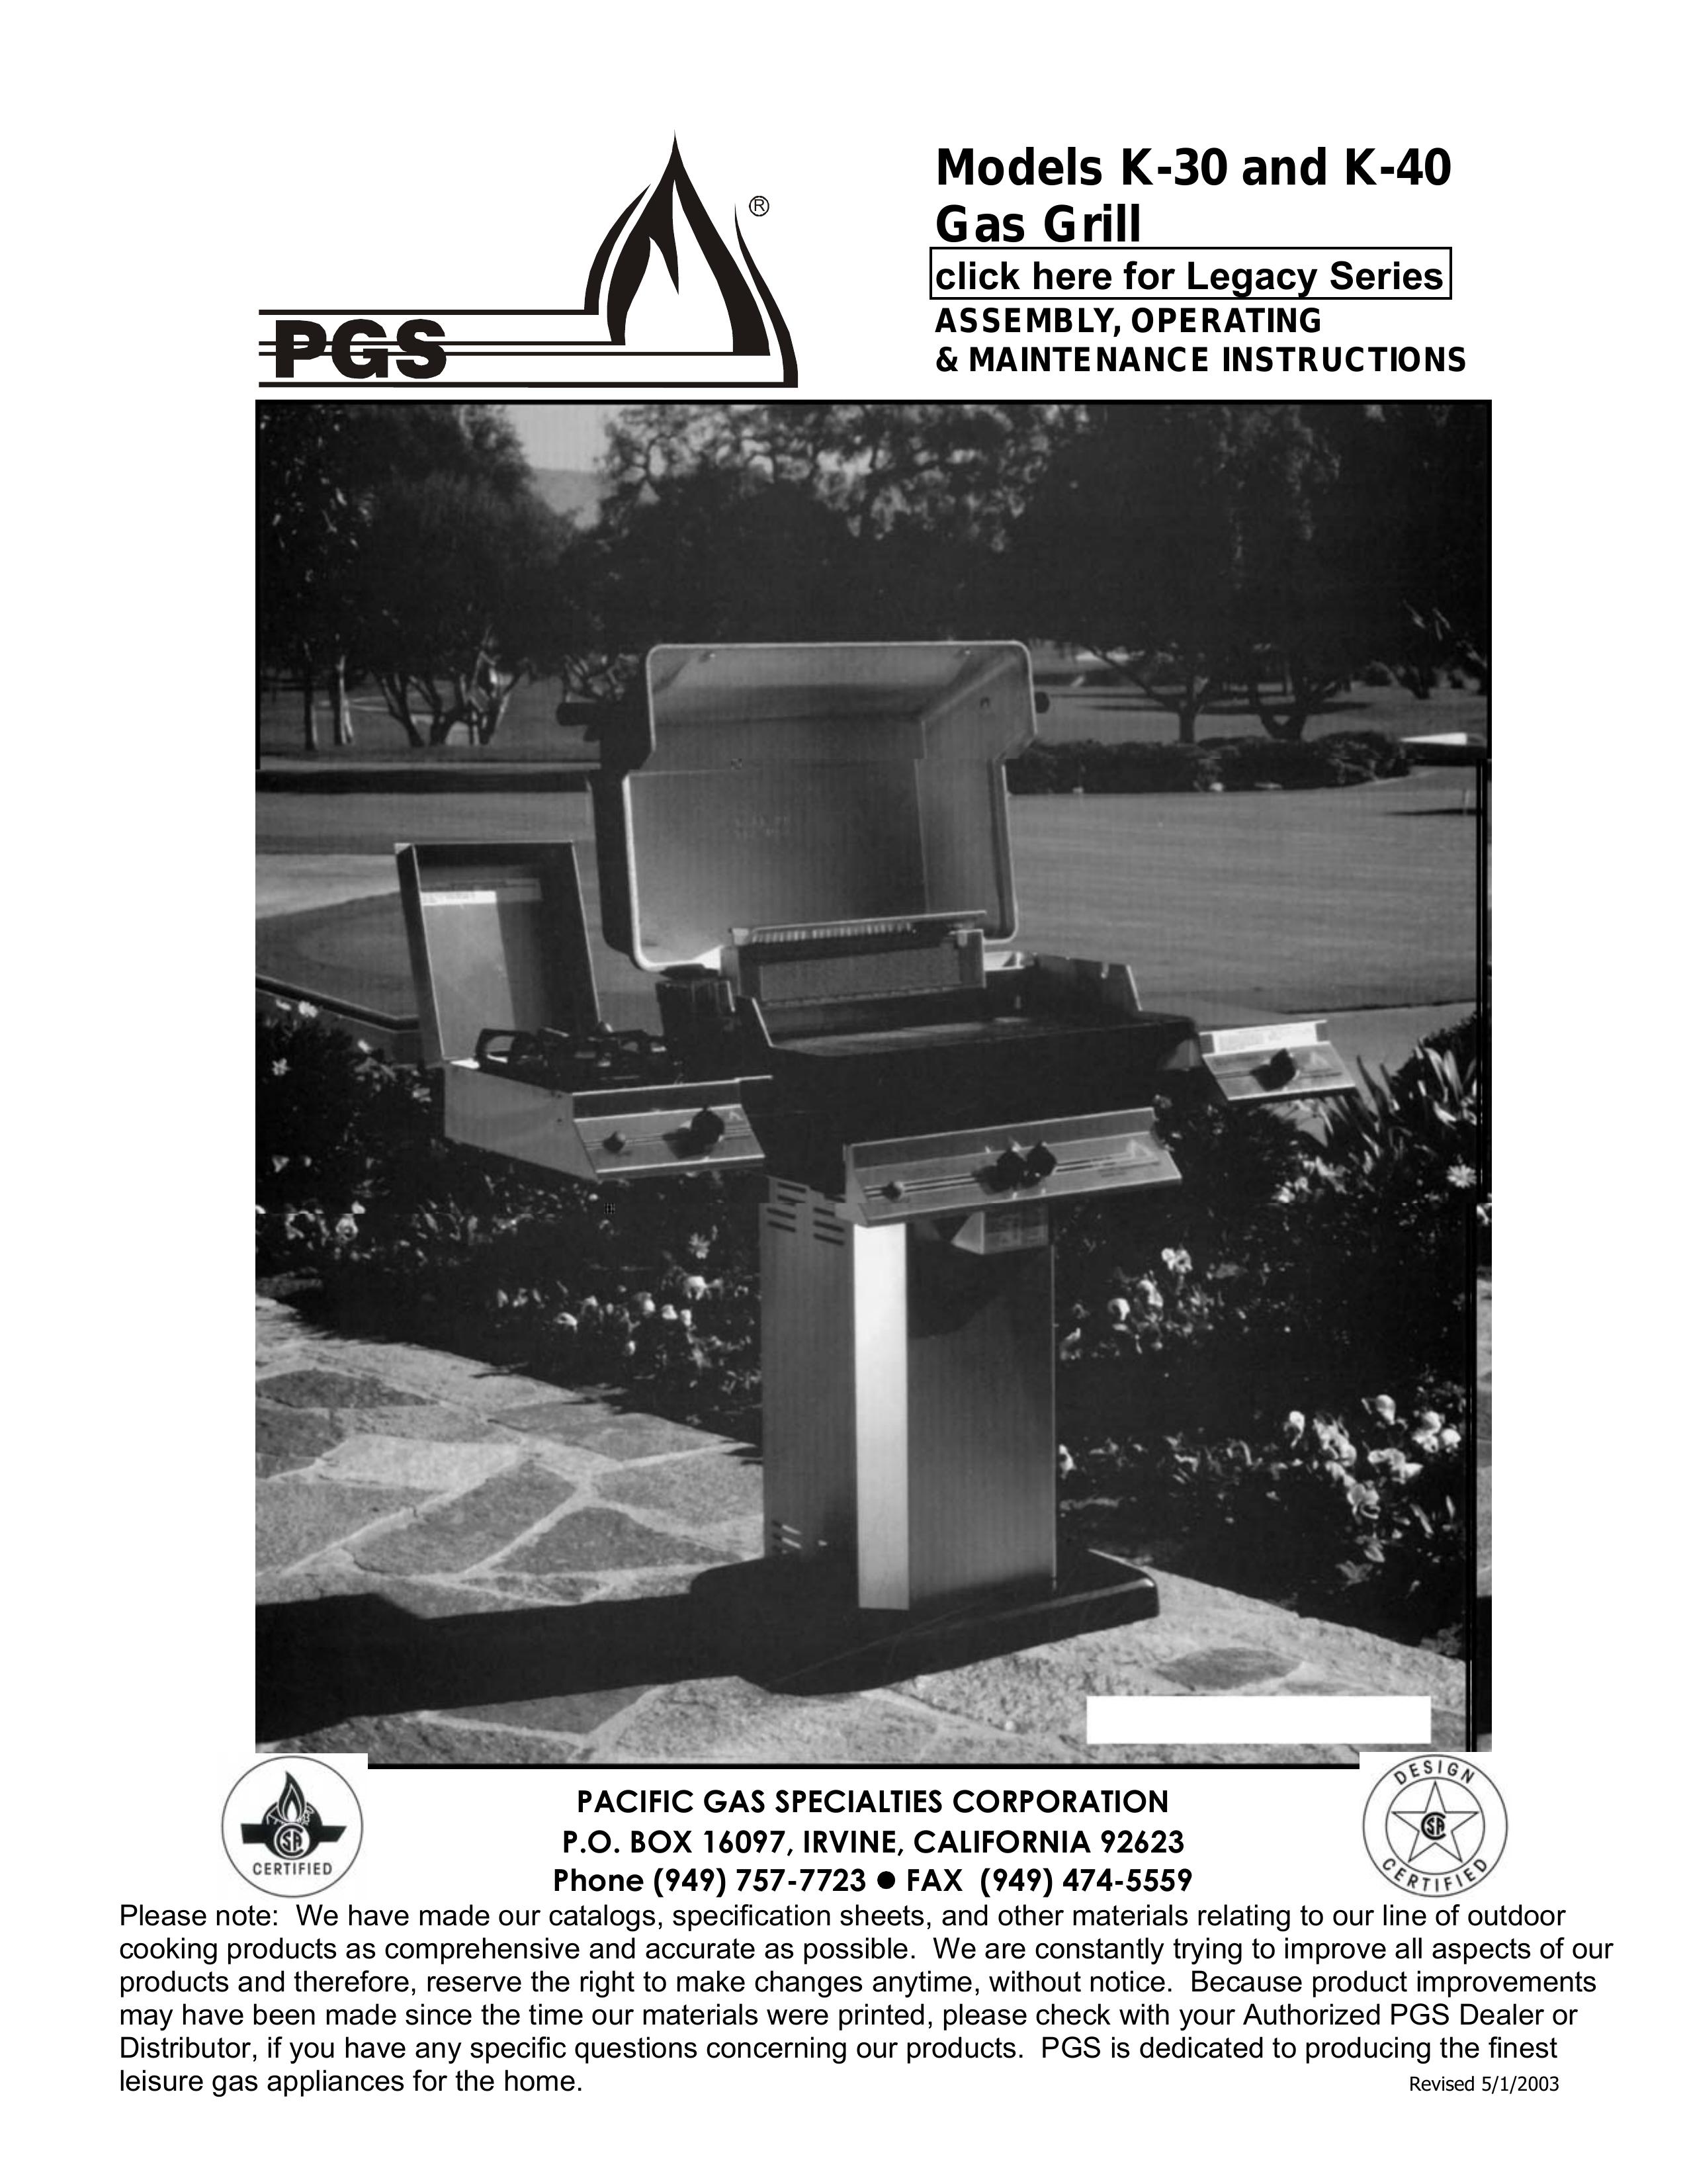 PGS K-40 Gas Grill User Manual